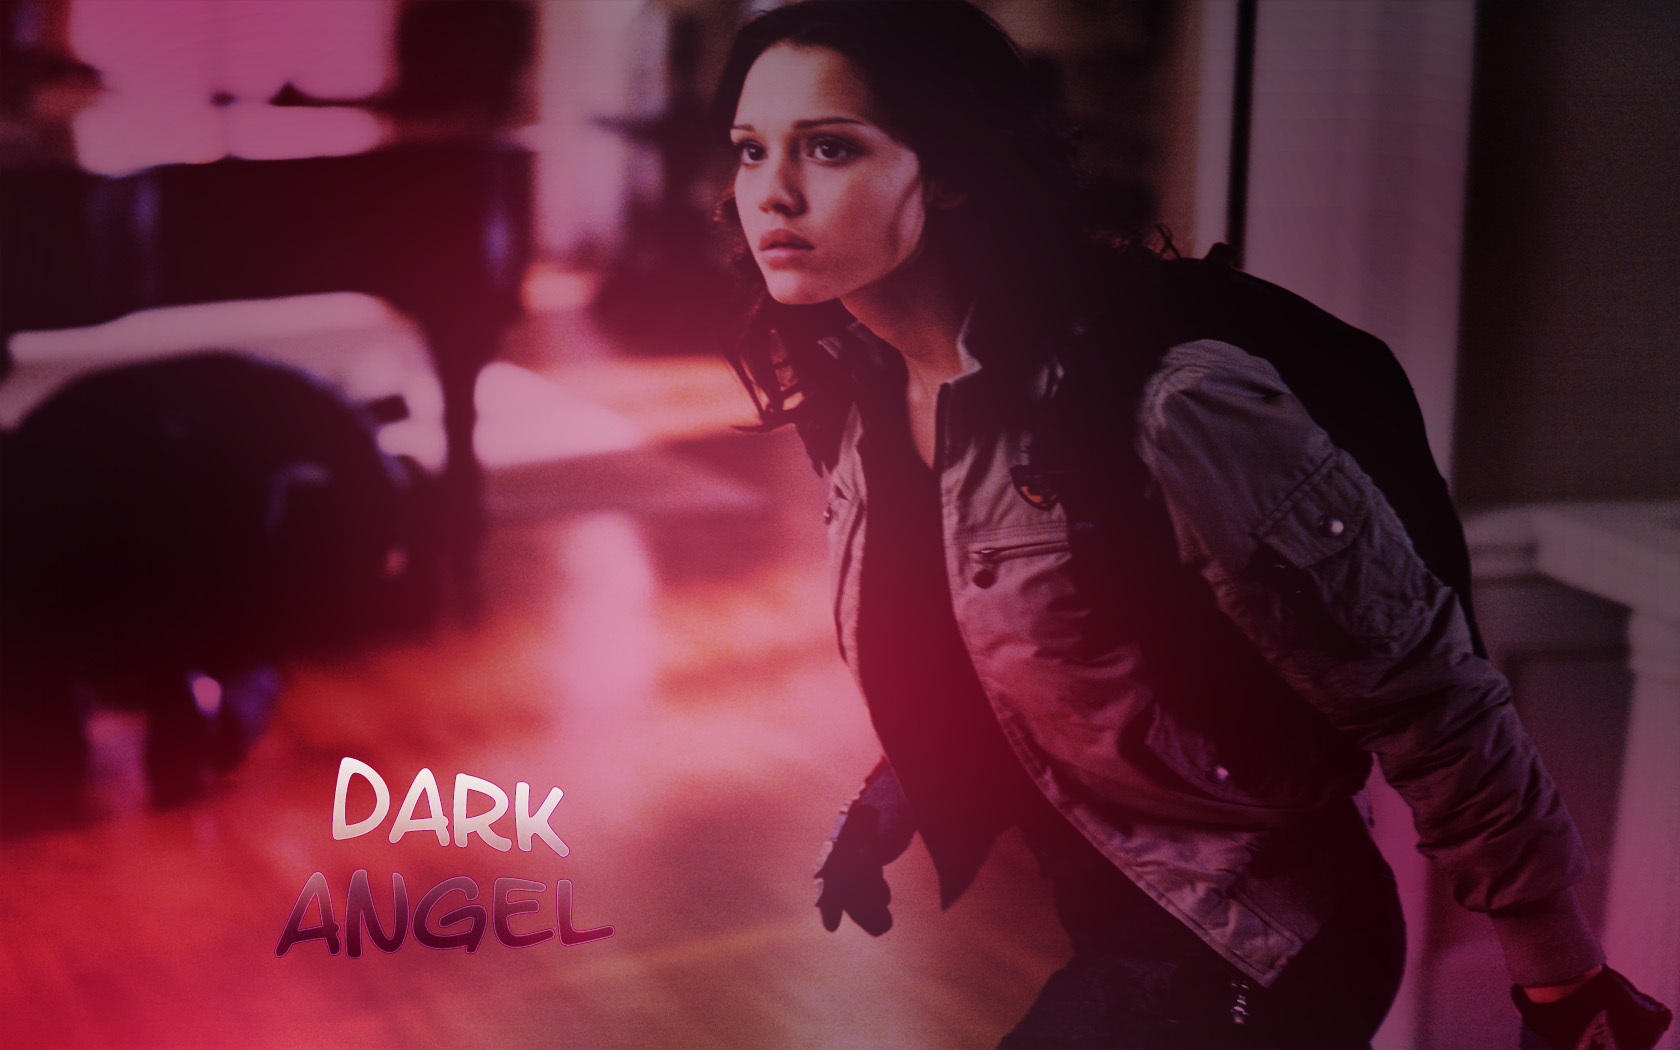 Download this Dark Angel picture